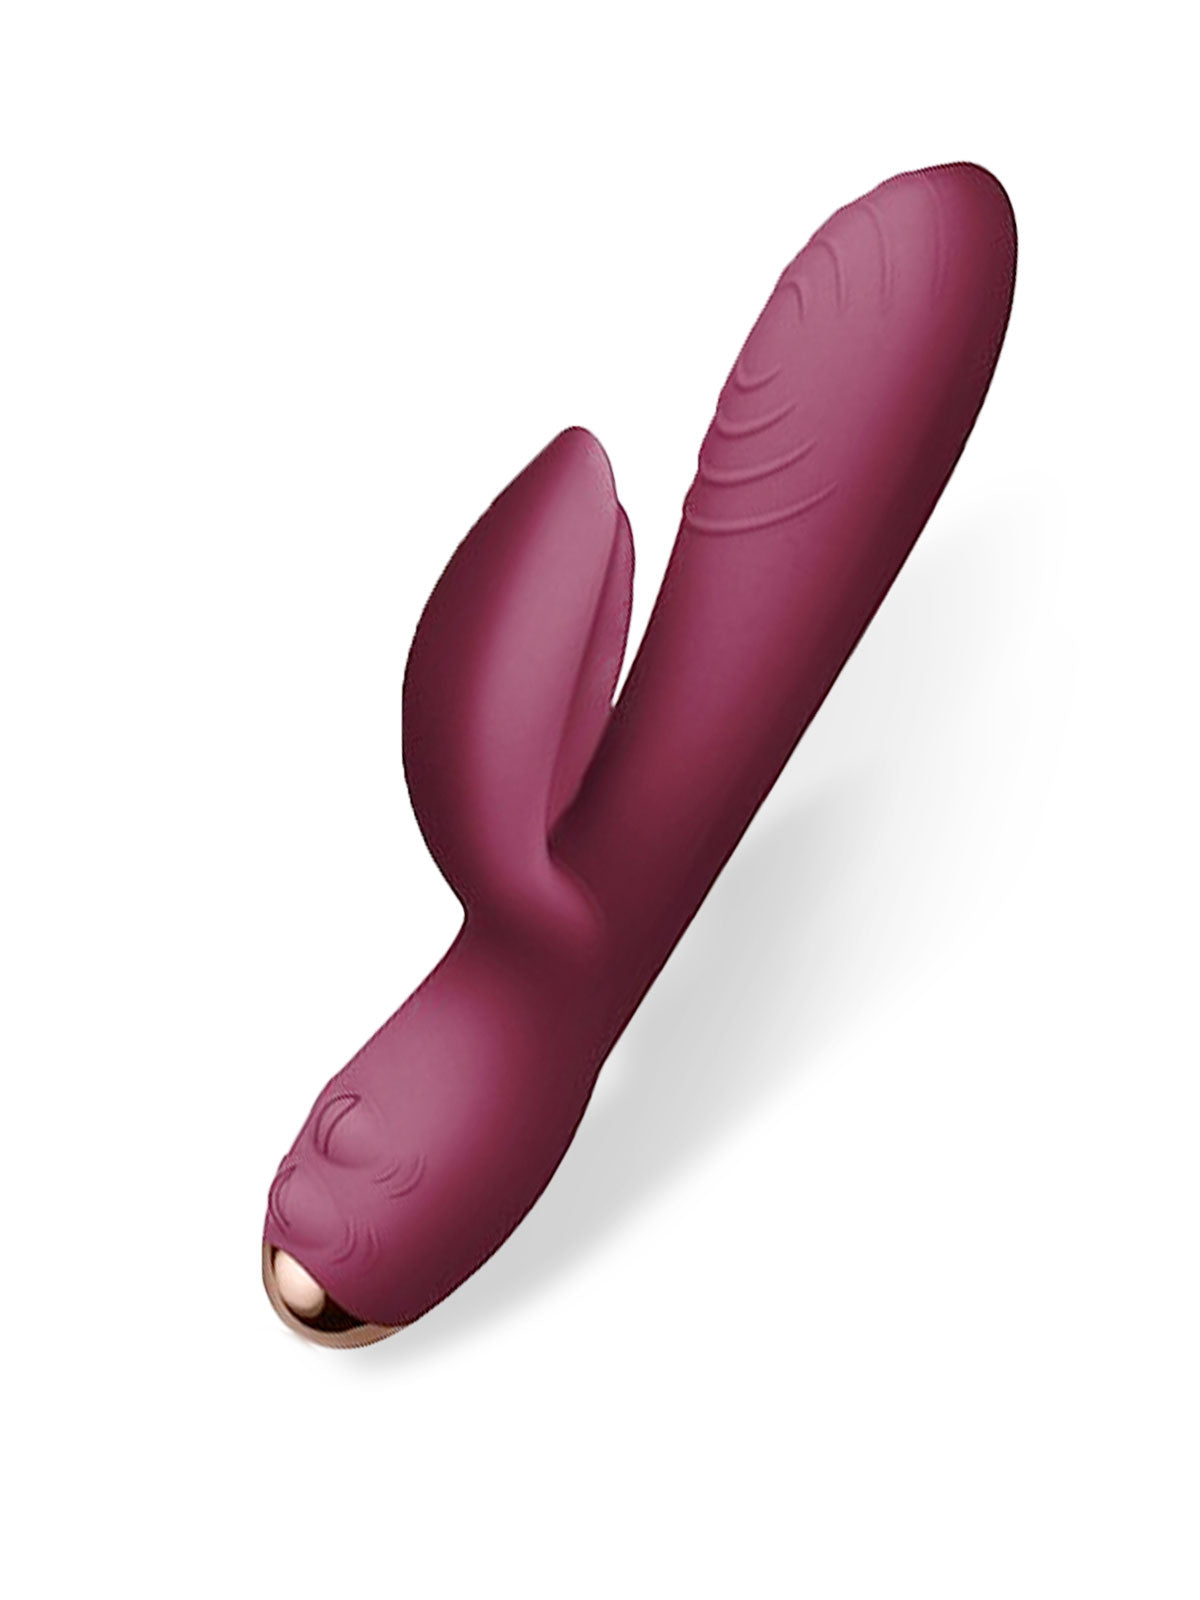 EveryGirl Dual Vibrator by Rocks Off